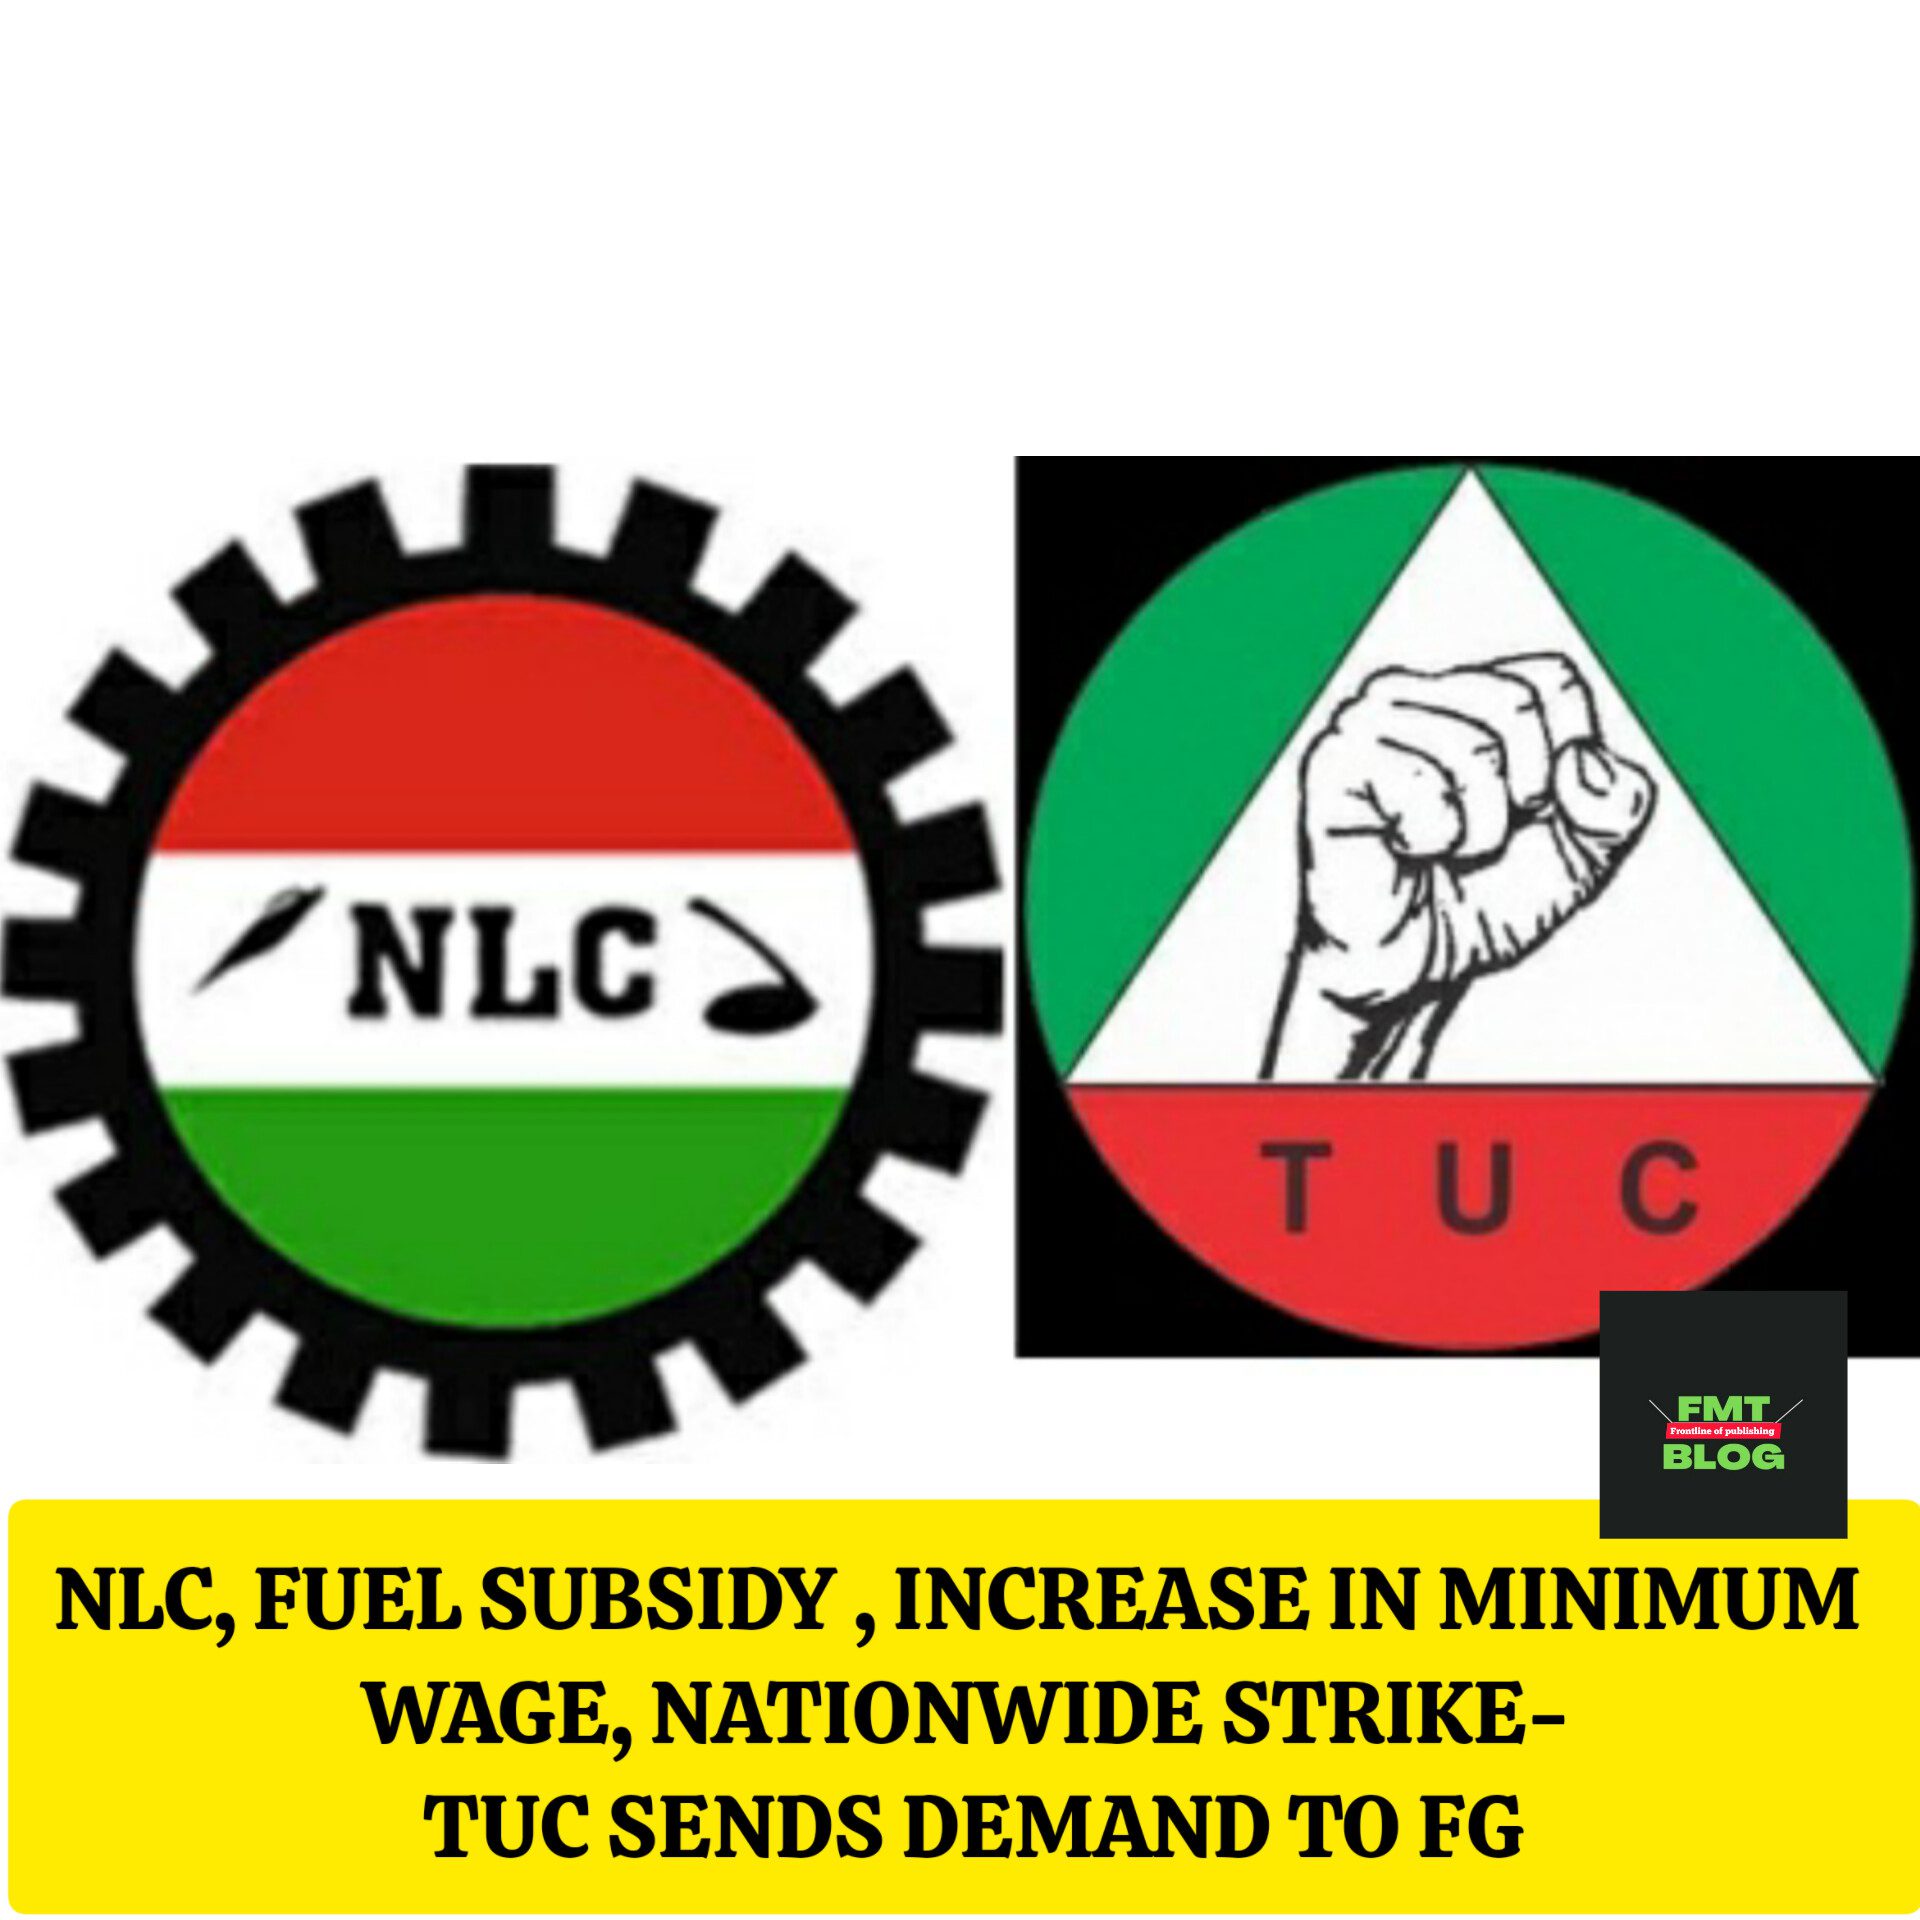 NLC, FUEL SUBSIDY, INCREASE IN MINIMUM WAGE, NATIONWIDE STRIKE-TUC SENDS DEMAND TO FG